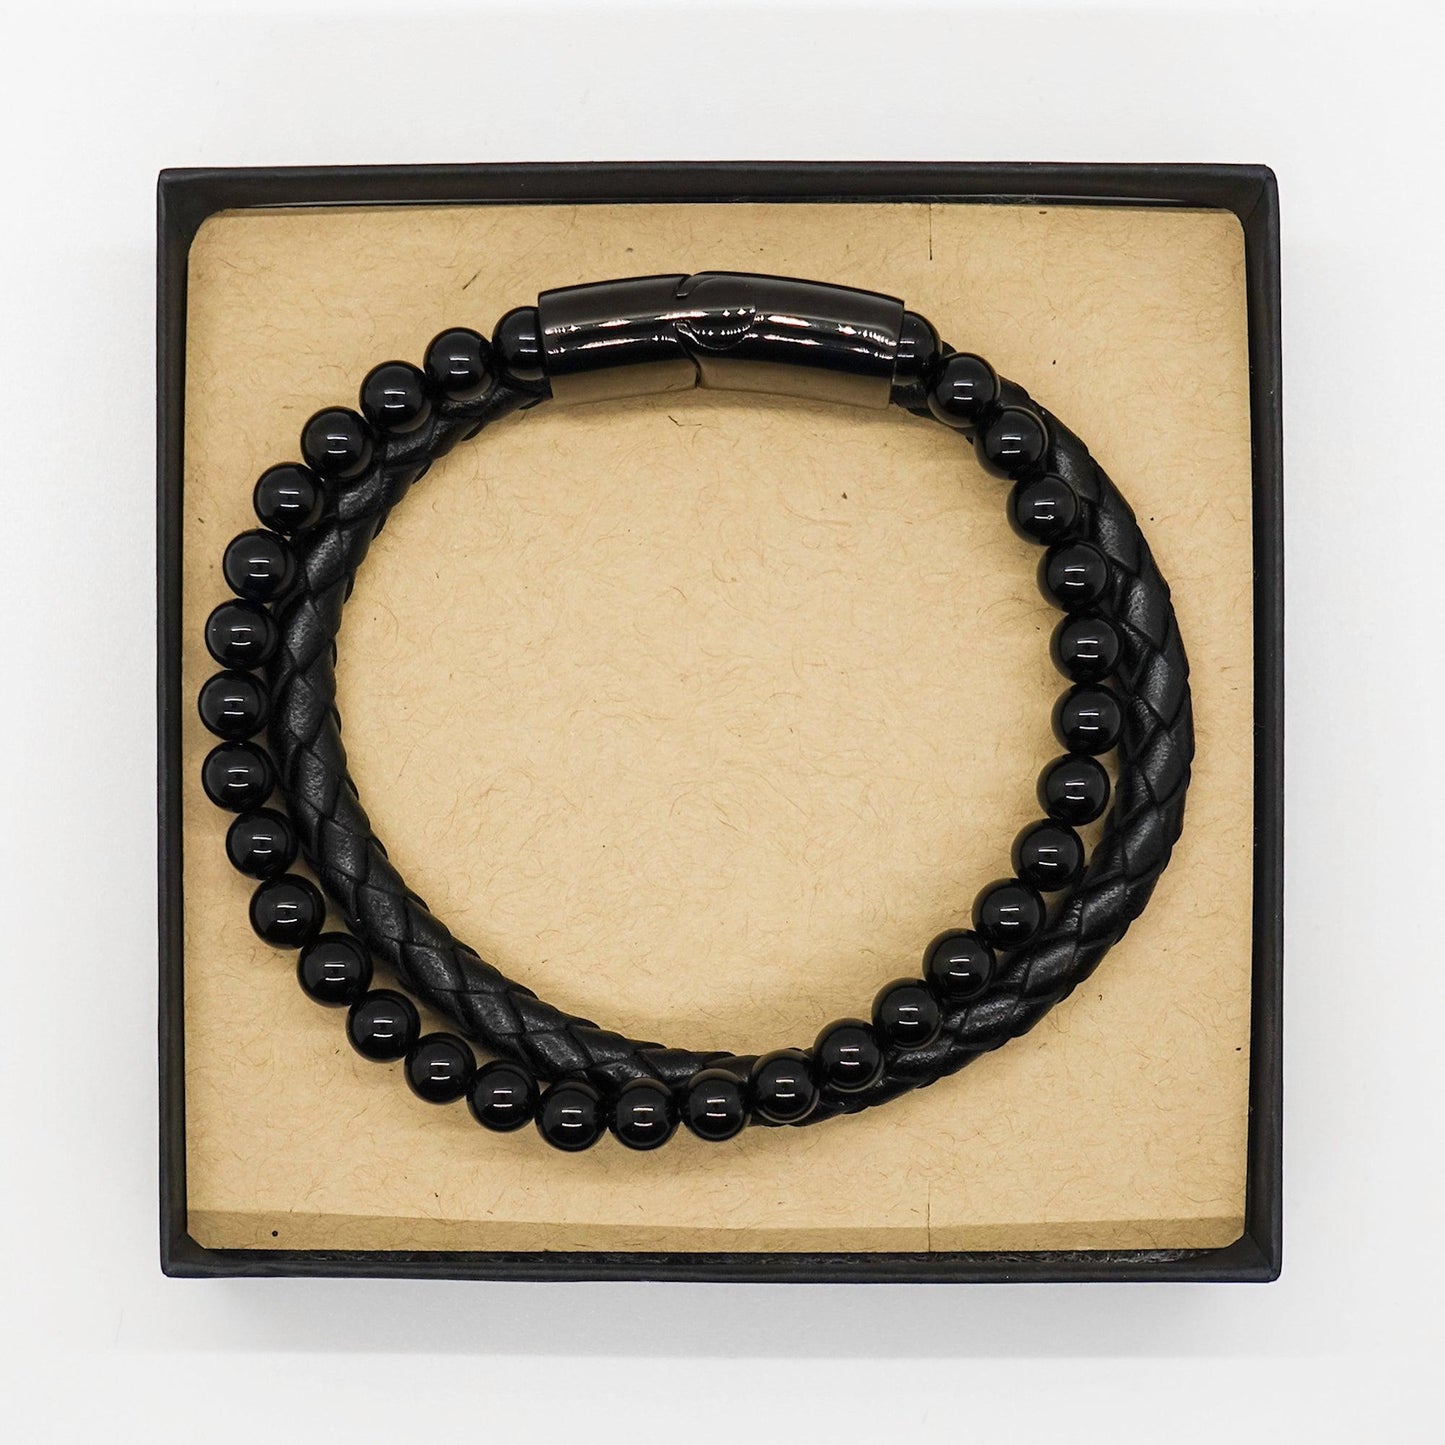 Warehouse Clerk Black Braided Leather Stone Bracelet - Thanks for being who you are - Birthday Christmas Jewelry Gifts Coworkers Colleague Boss - Mallard Moon Gift Shop